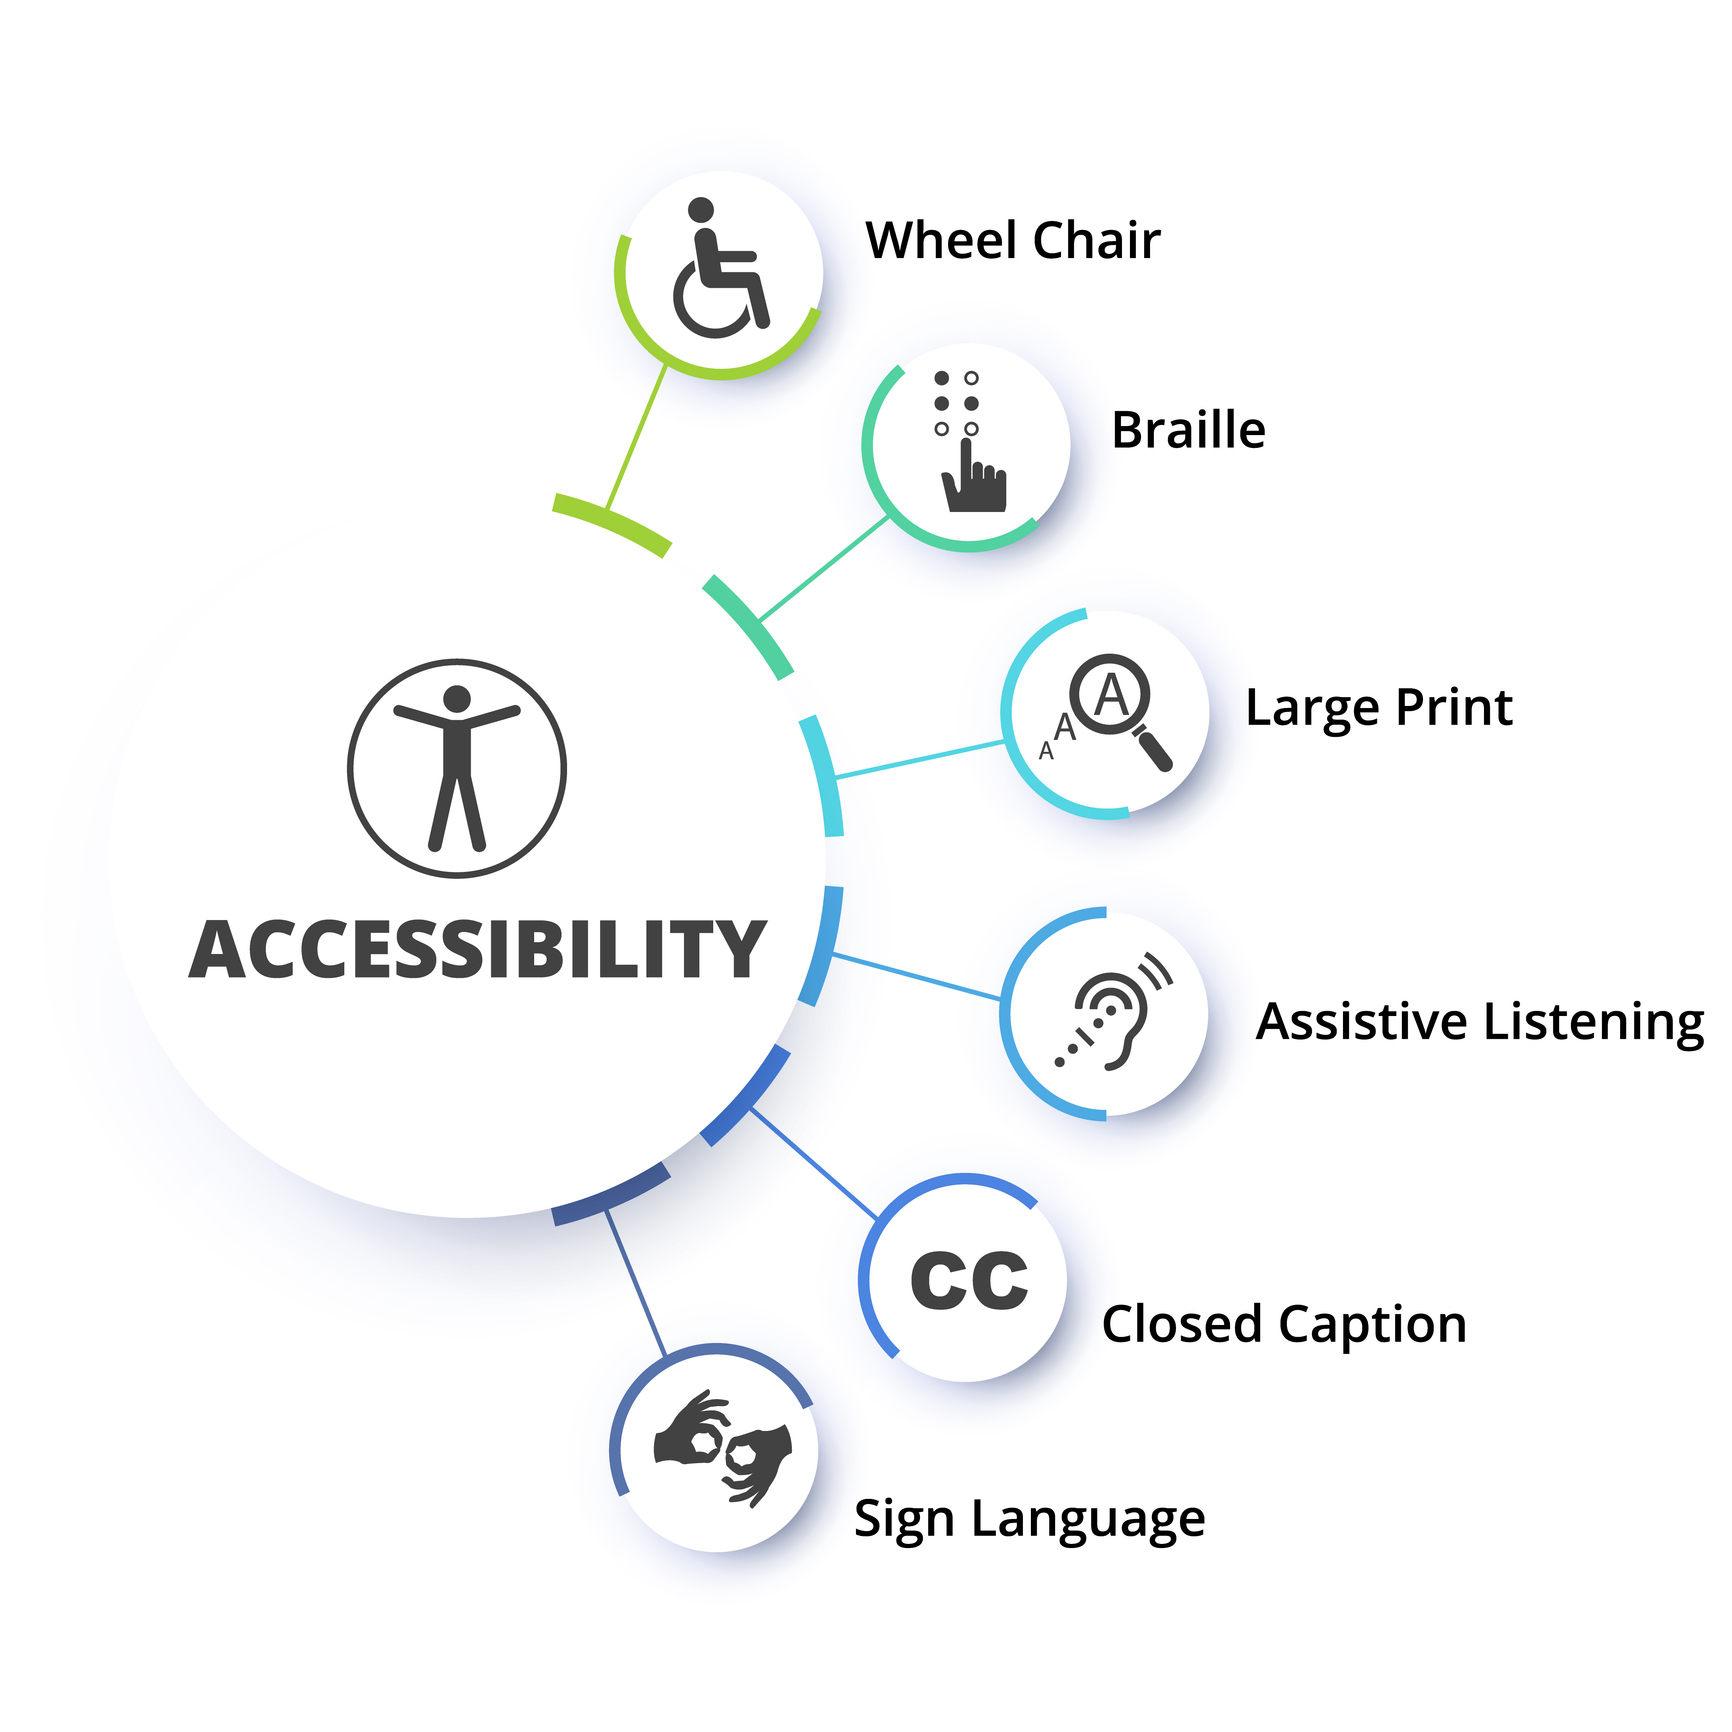 Accessible Services Chart, Wheel Chair, Braille, Large Print, Assistive Listening, Closed Caption, Sign Language